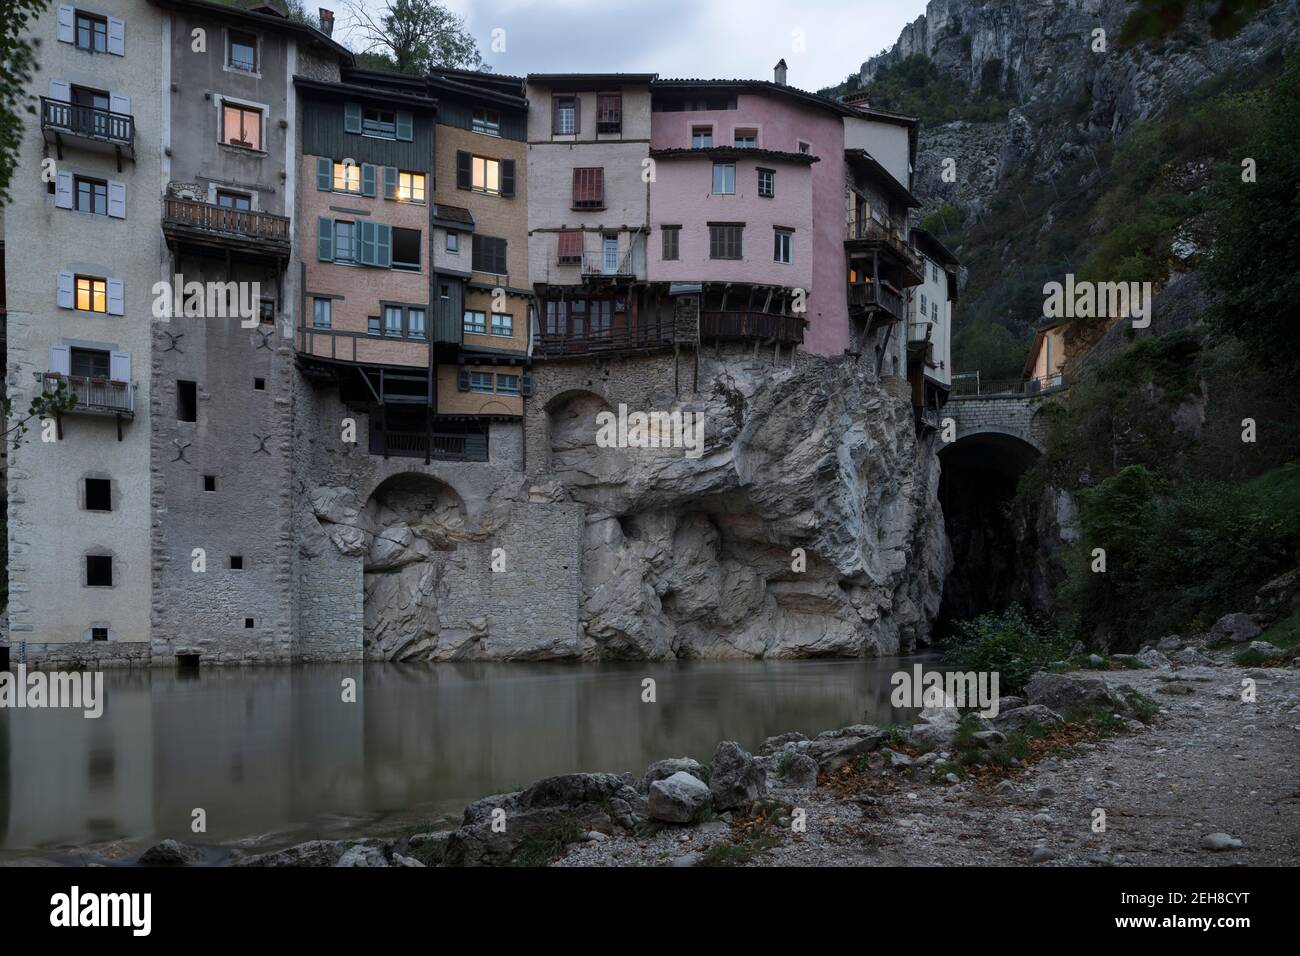 View along the river of one of the characteristic suspended dwellings of Pont-en-Royans, in the Auvergne-Rhone-Alps region, during the twilight. Stock Photo